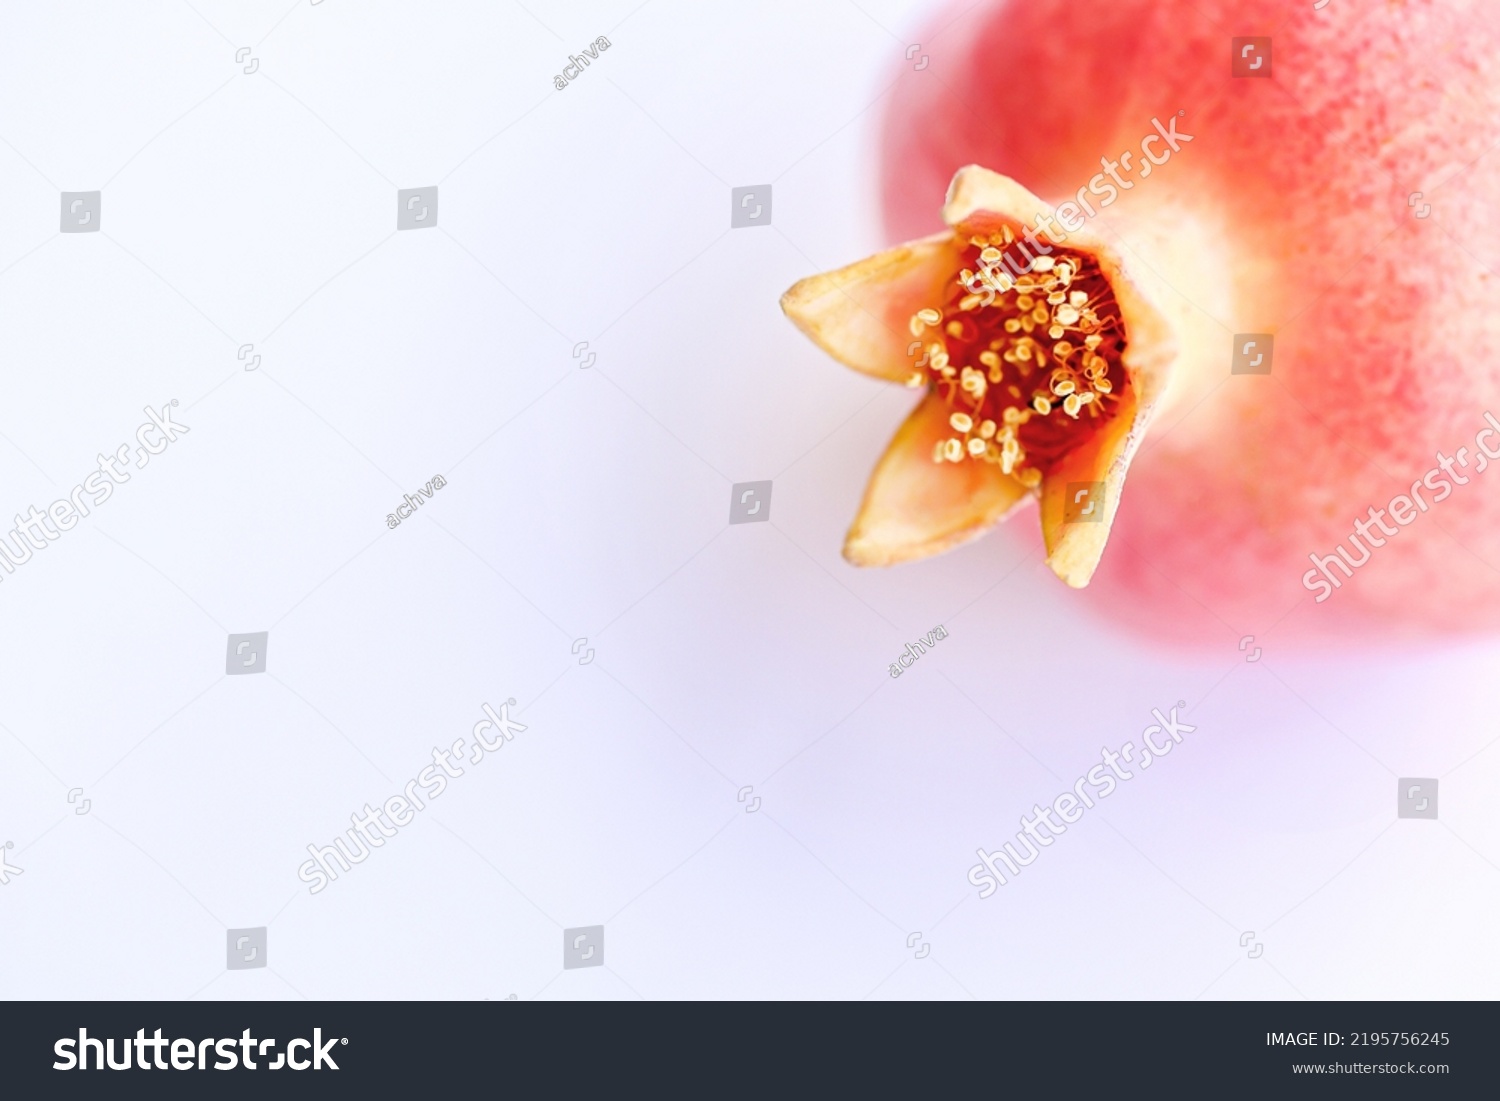 stock-photo-red-pomegranate-on-a-white-background-2195756245.jpg